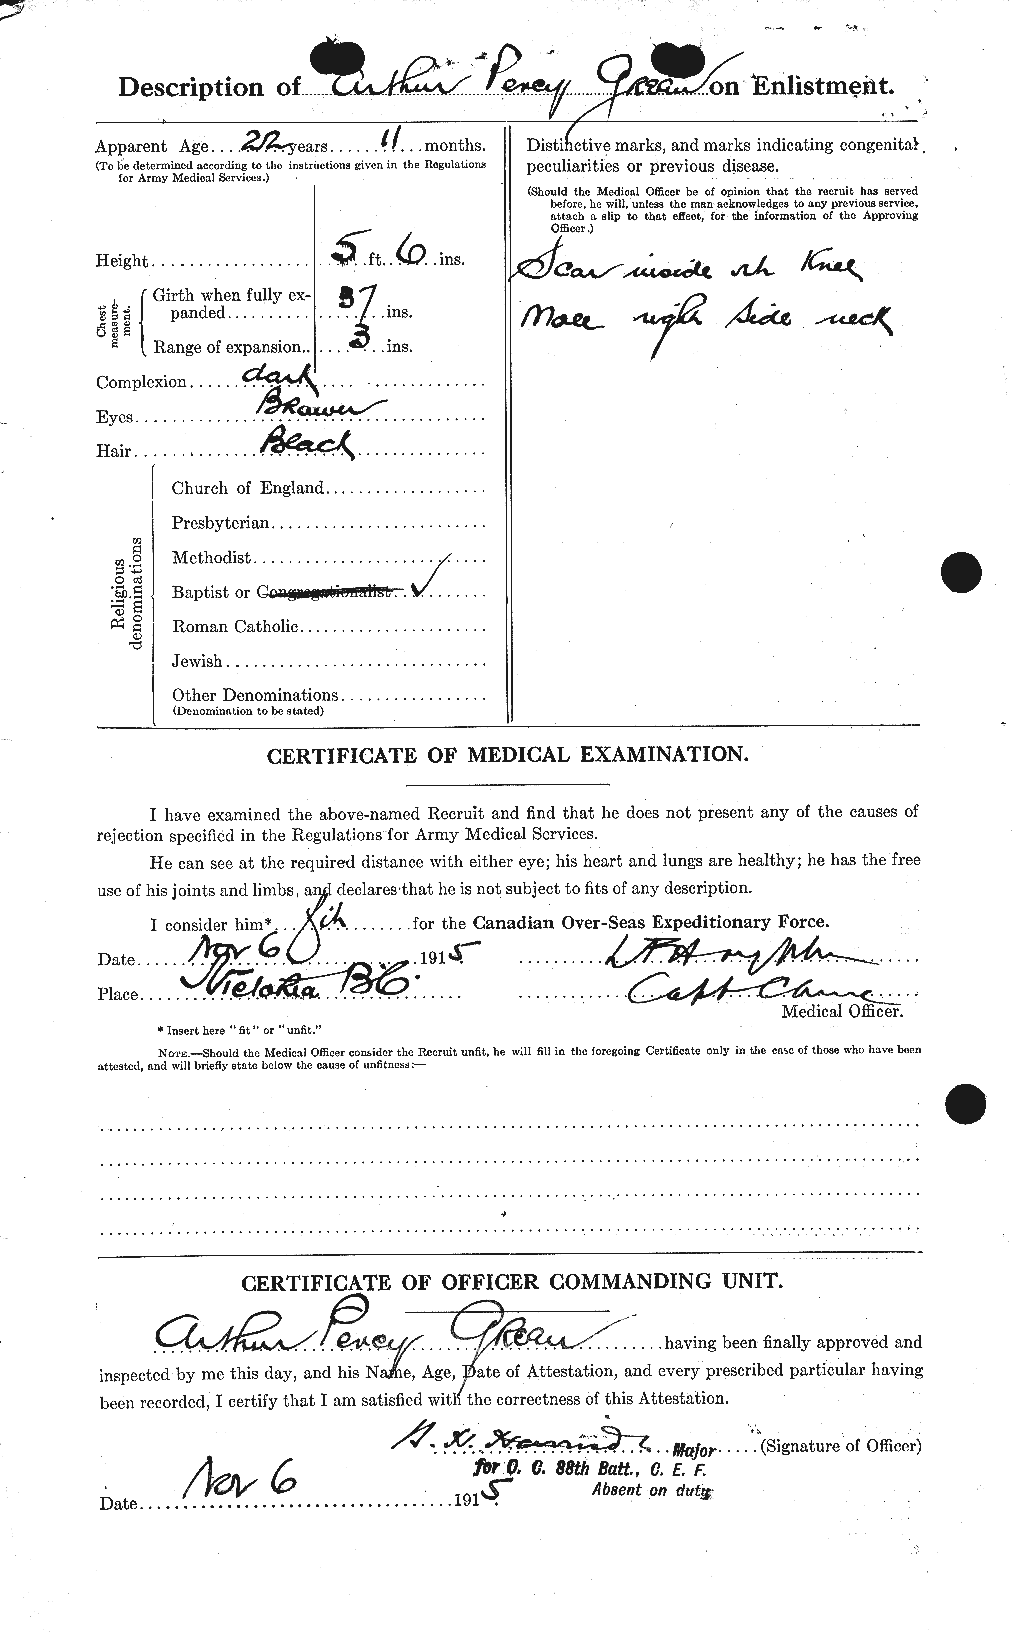 Personnel Records of the First World War - CEF 363849b